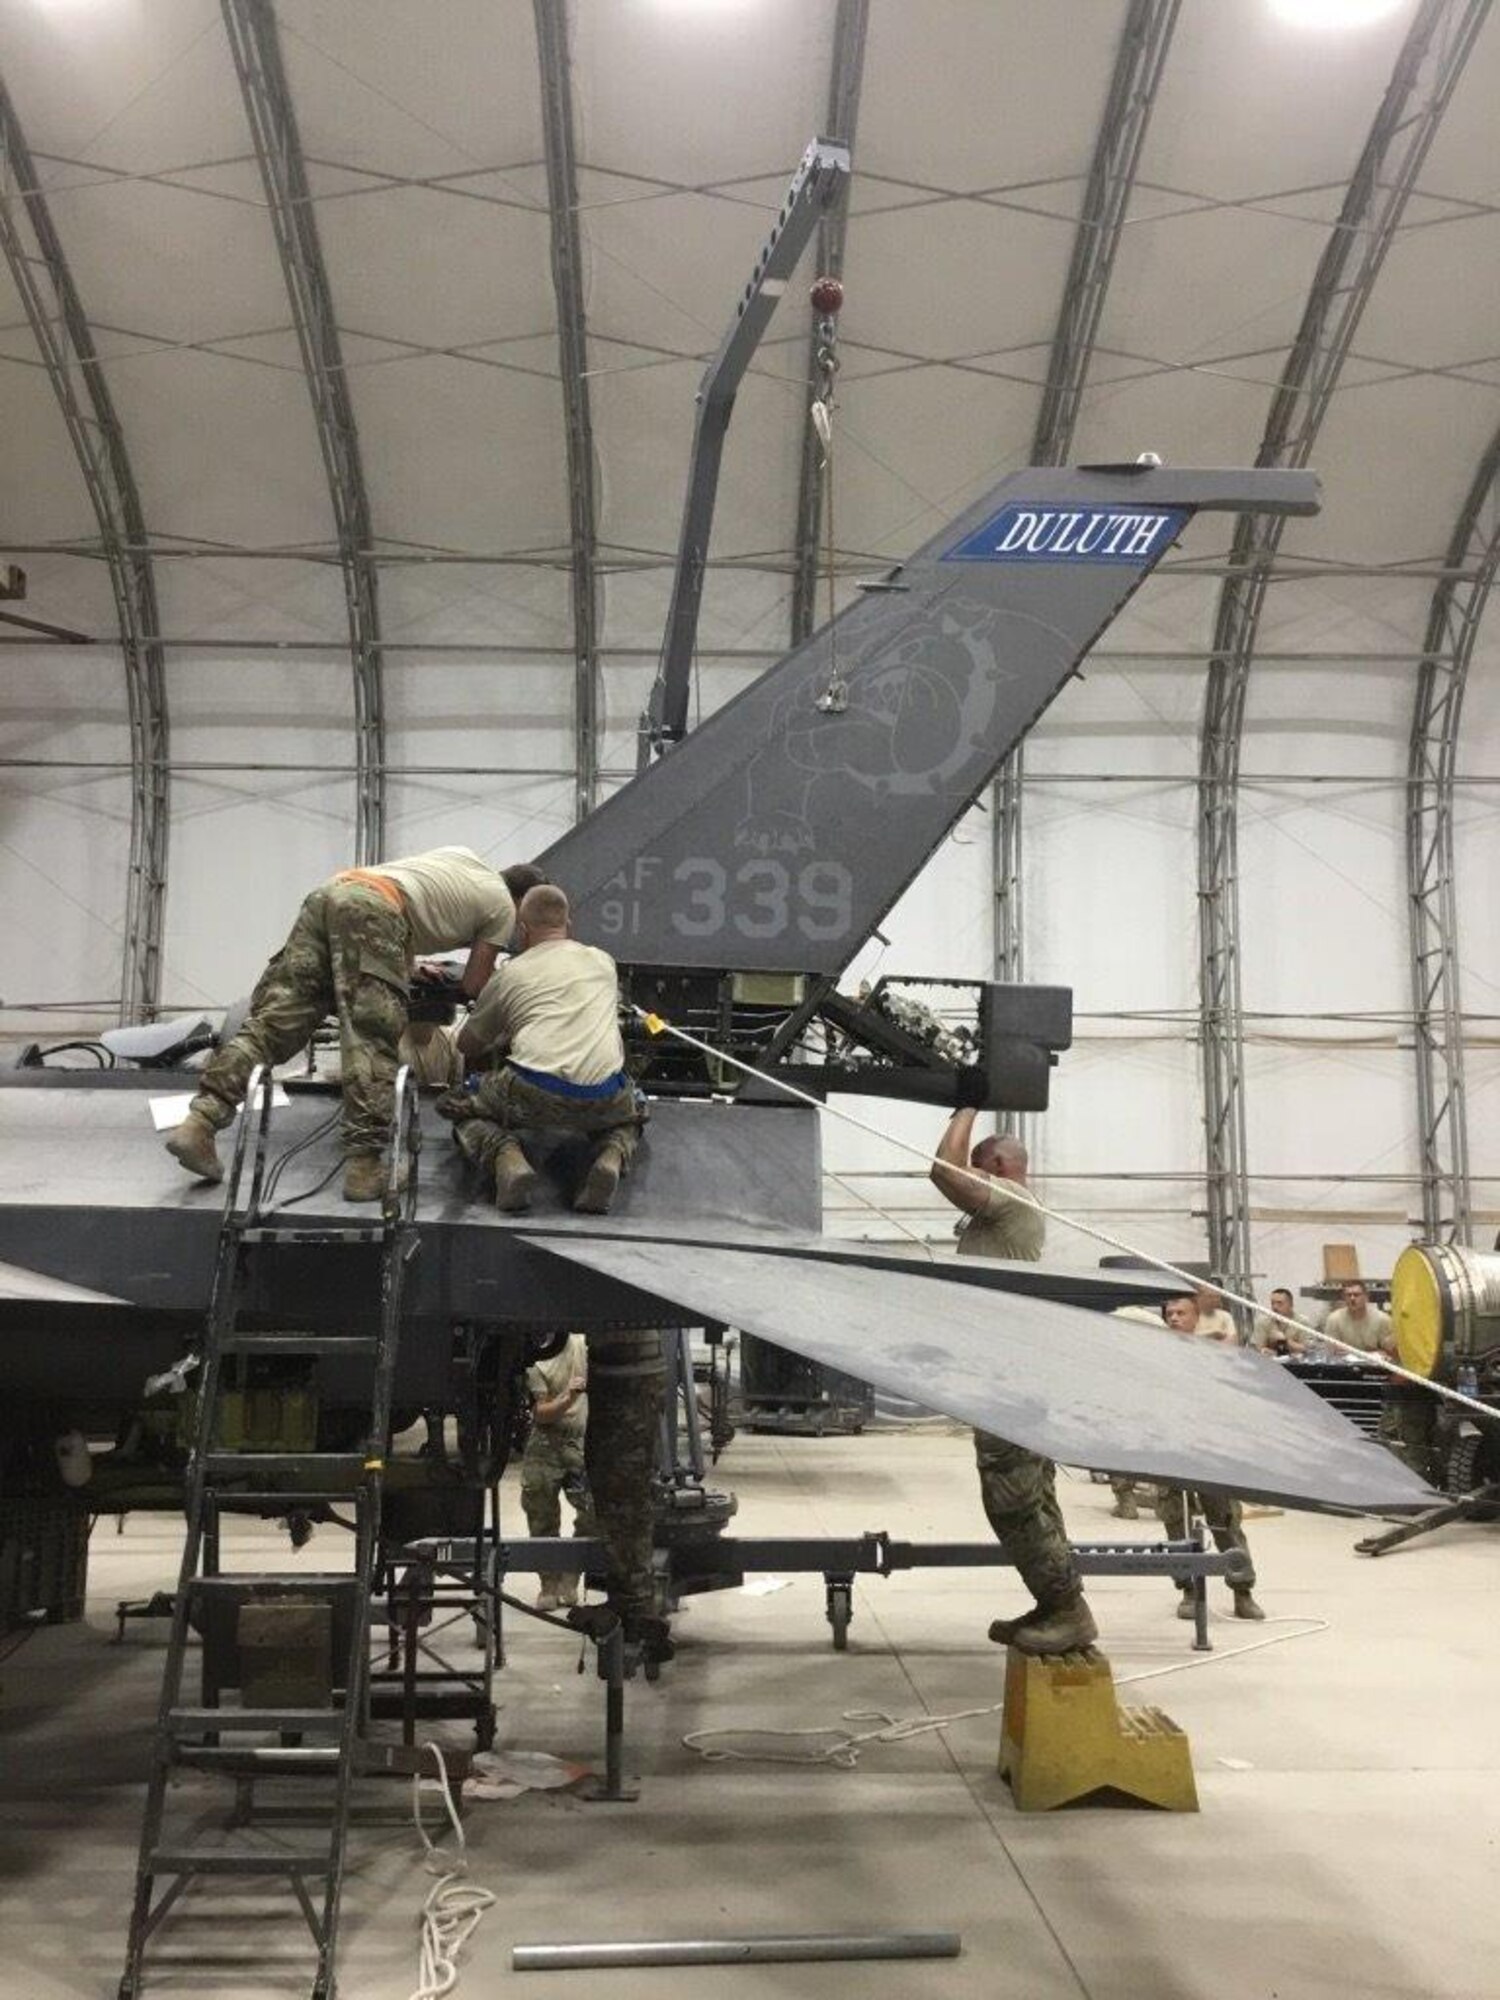 Aircraft maintenance personnel perform maintenance on battle damaged F-16s after a storm that caused 91-mile per hour winds to collapse sunshades at the 407th Air Expeditionary Group in 2018.